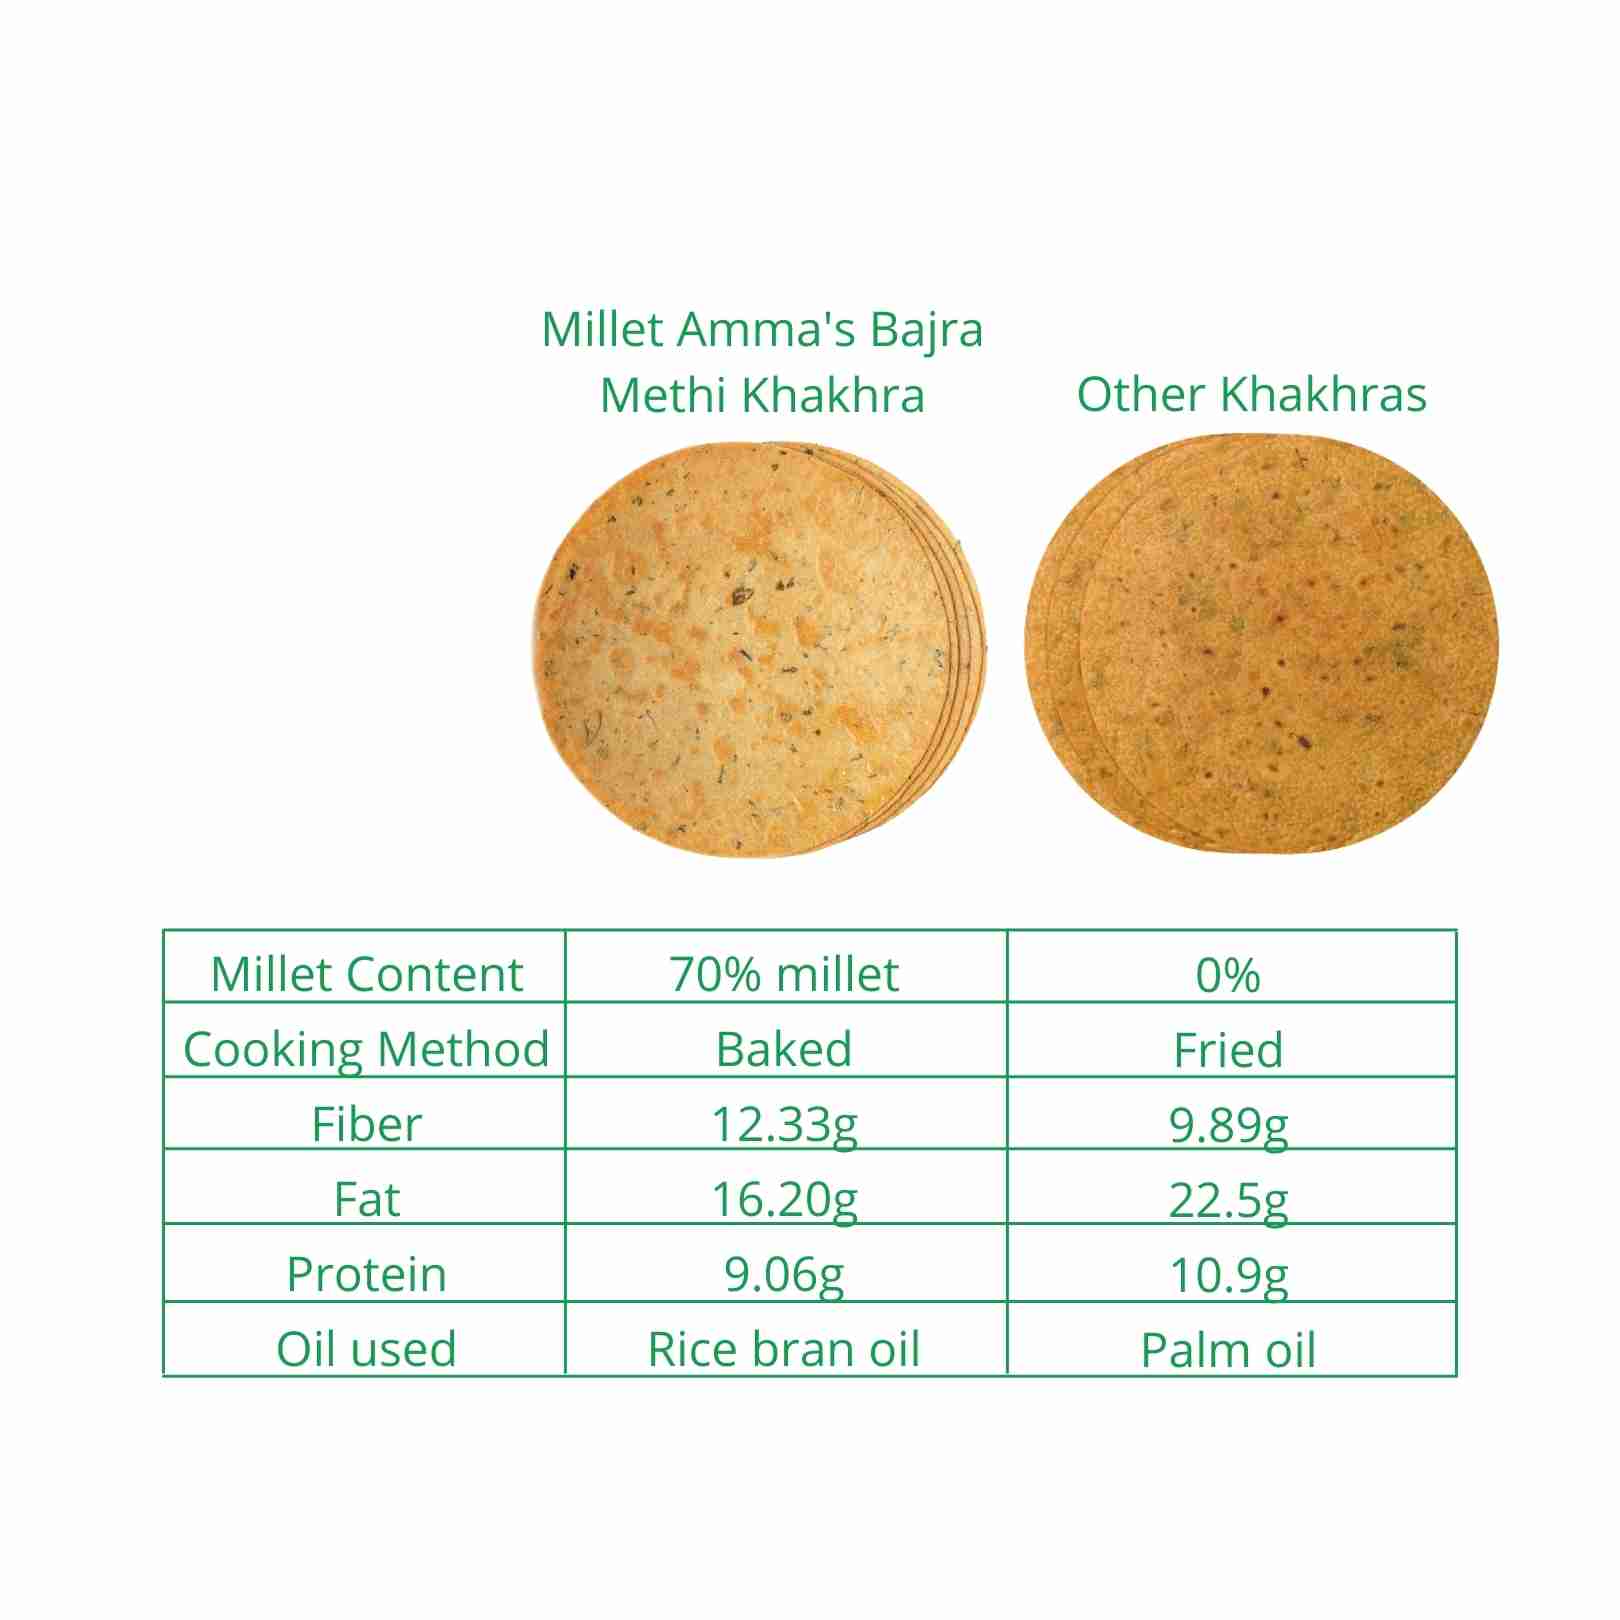 Millet Amma’s Bajra Methi Khakhra- A millet based, savoury cracker, introducing you to Millet Amma’s Bajra Methi Khakhra.  Made with Whole Wheat Flour, Bajra Millet, Methi Leaves, Rice Bran Oil and Green Chili.  Unlike other khakhras, Amma’s bajra khakhra is baked and not fried in oil. Crunchy and melt in your mouth this khakhra is perfect for guilt-free binging.